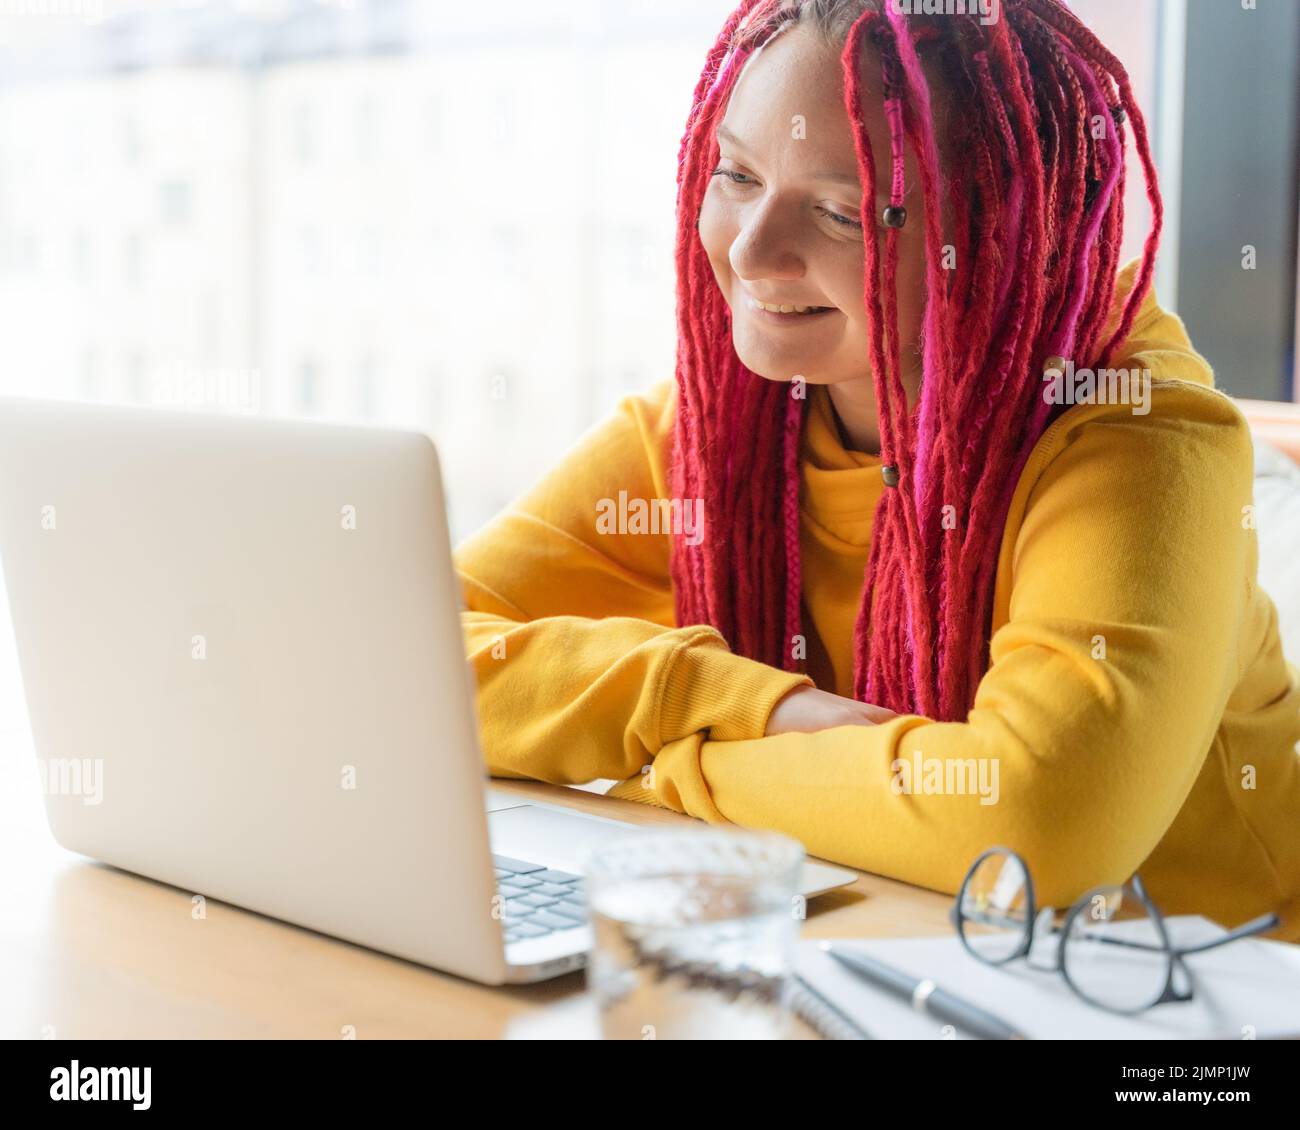 Digital nomad concept. Girl freelancer remotely working on laptop in cafe, coworking. Stock Photo